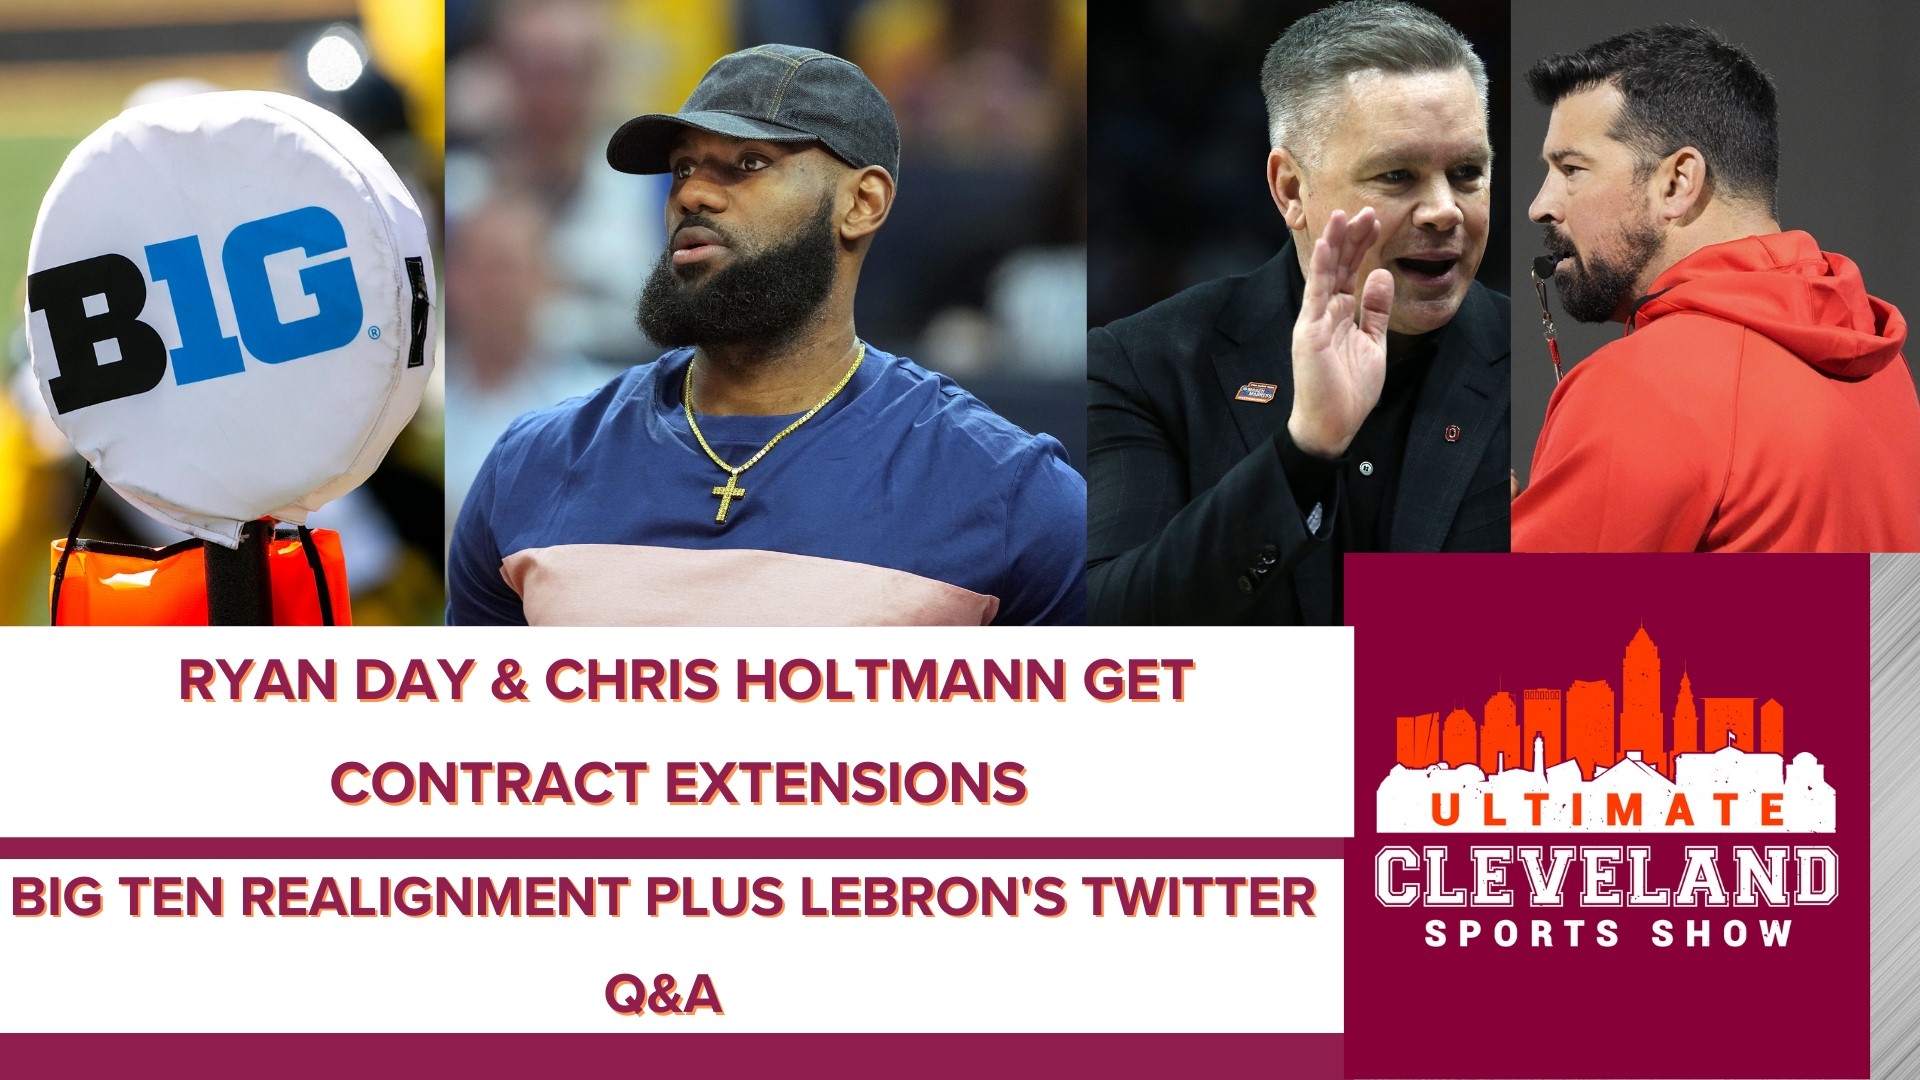 UCSS reacts to LeBron's Twitter Q&A including Kyrie Irving's comments. Ohio State's Ryan Day and Chris Holtmann receive contract extensions plus Big 10 realignment.